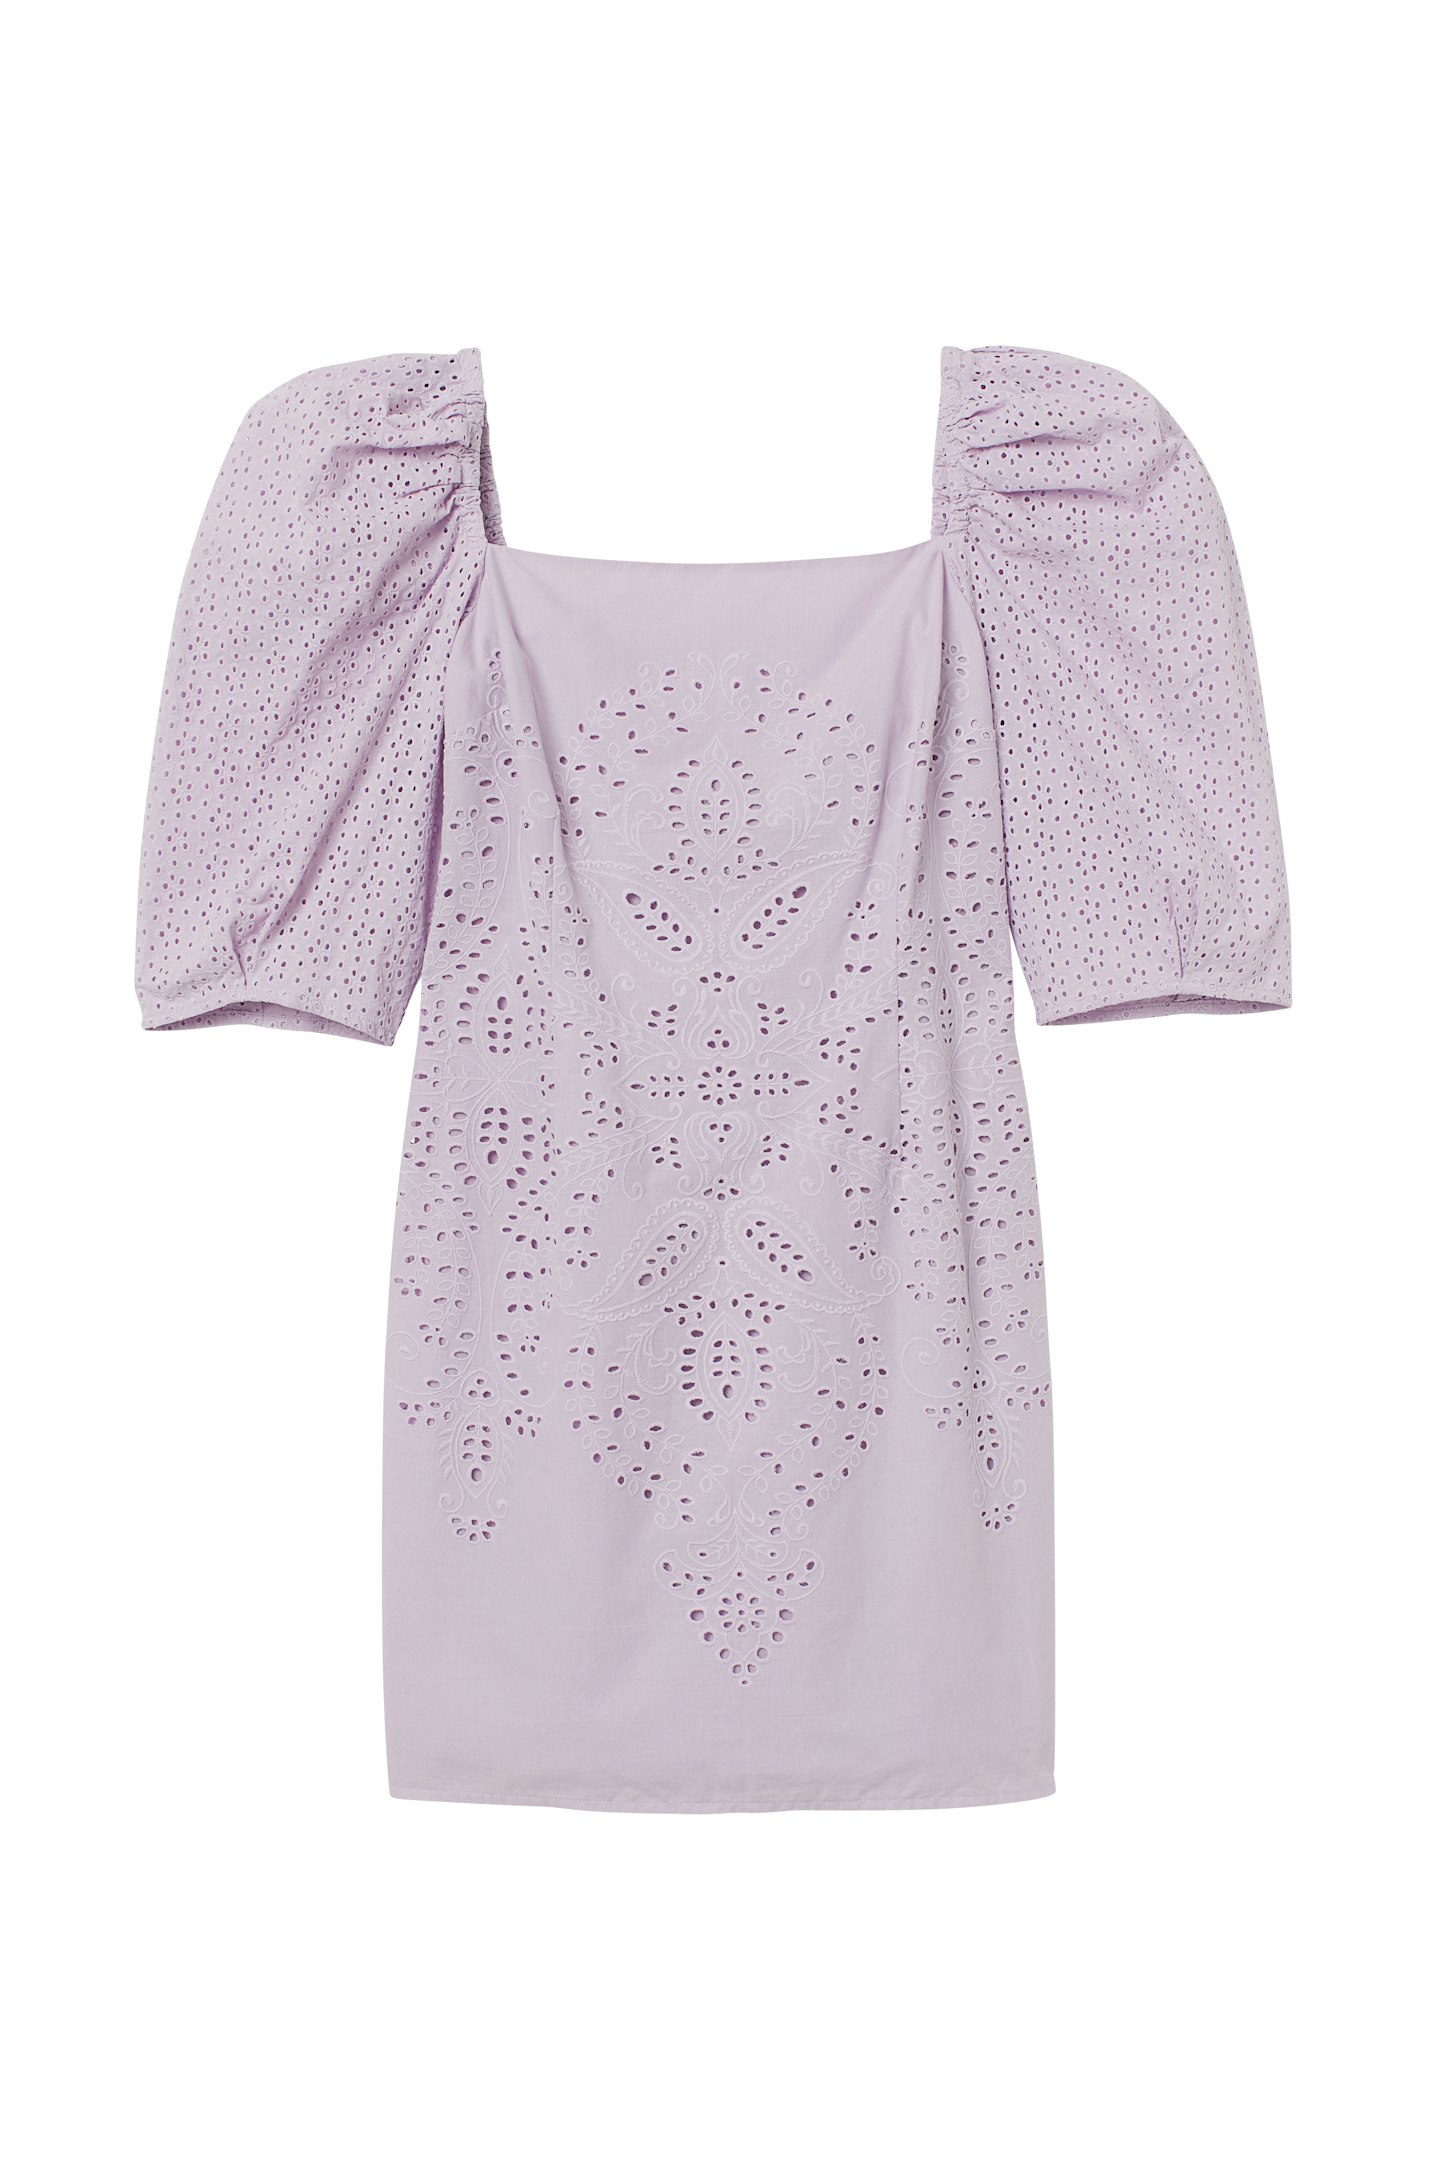 Broderie Anglaise Dress, £24.99